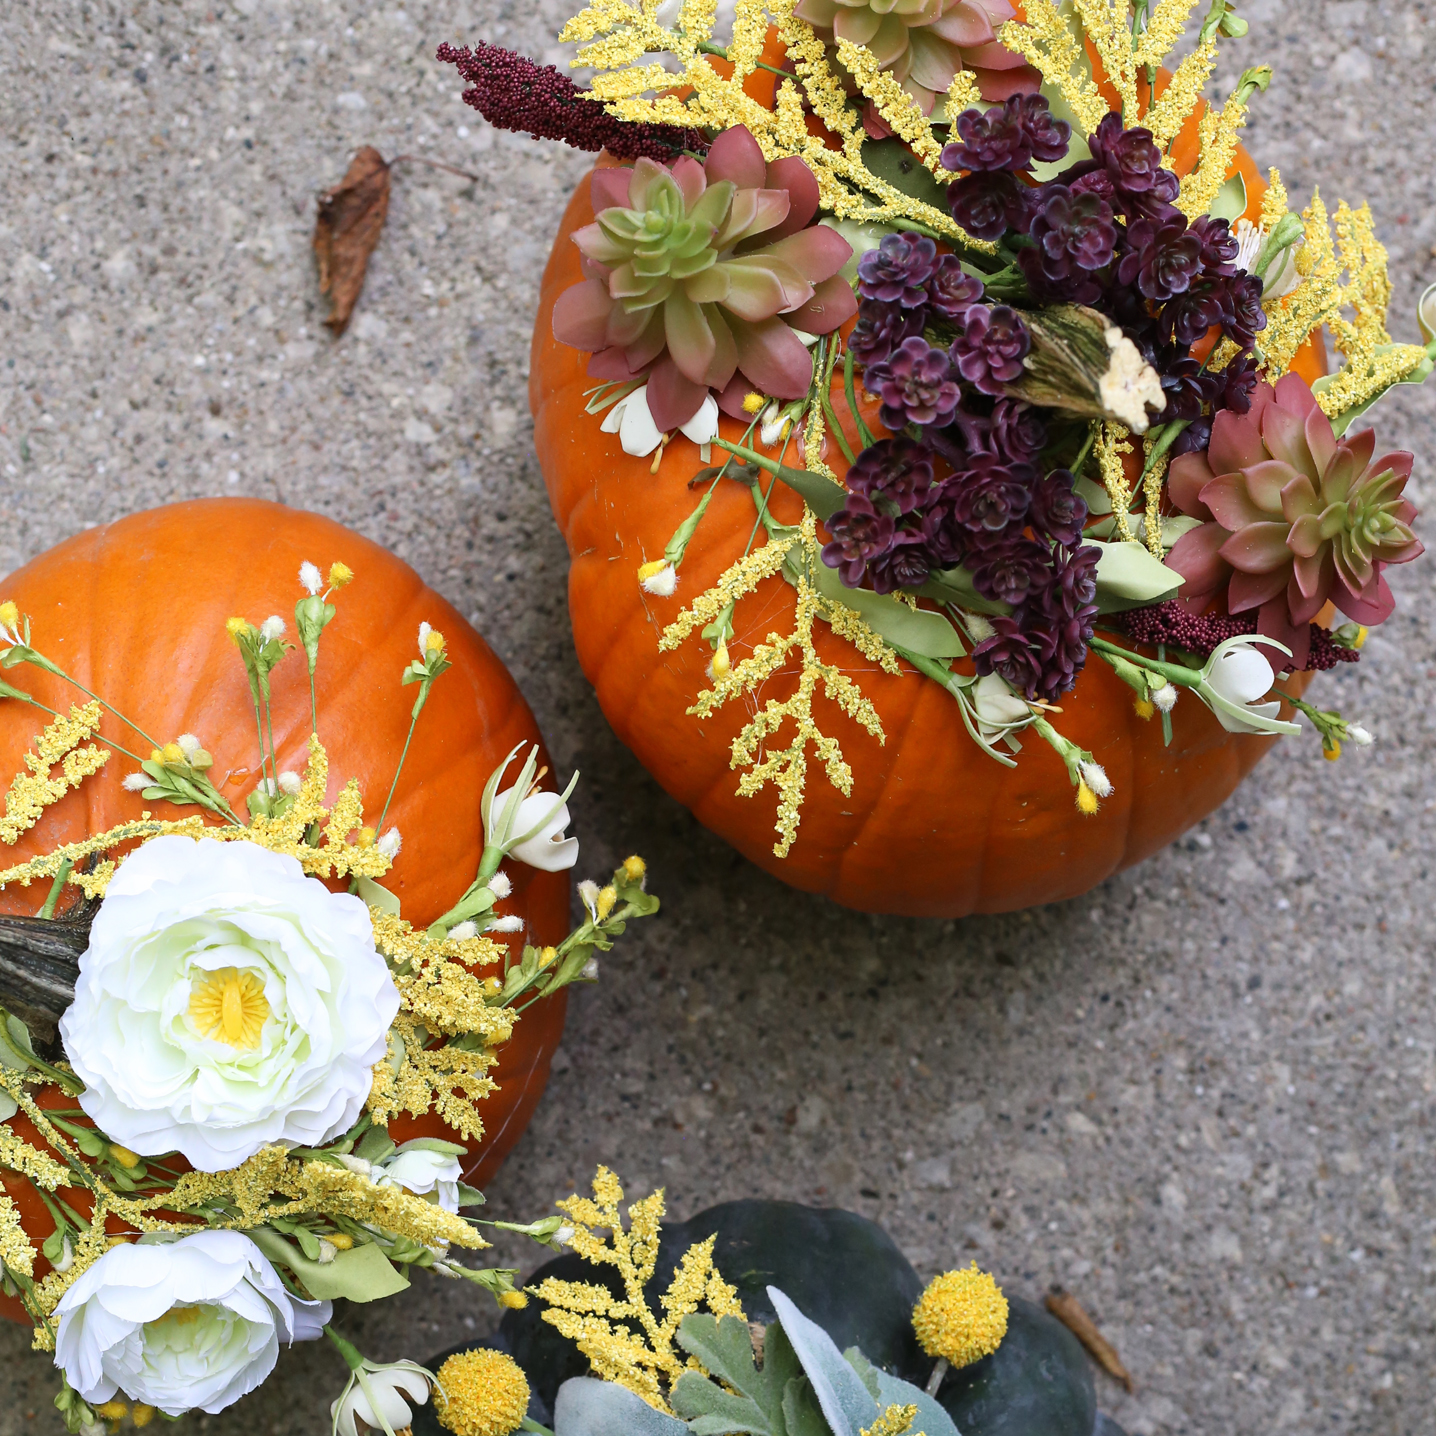 Mess free and simple steps make these DIY Floral Pumpkins a must try! Fall DIY project on Lily & Val Living!